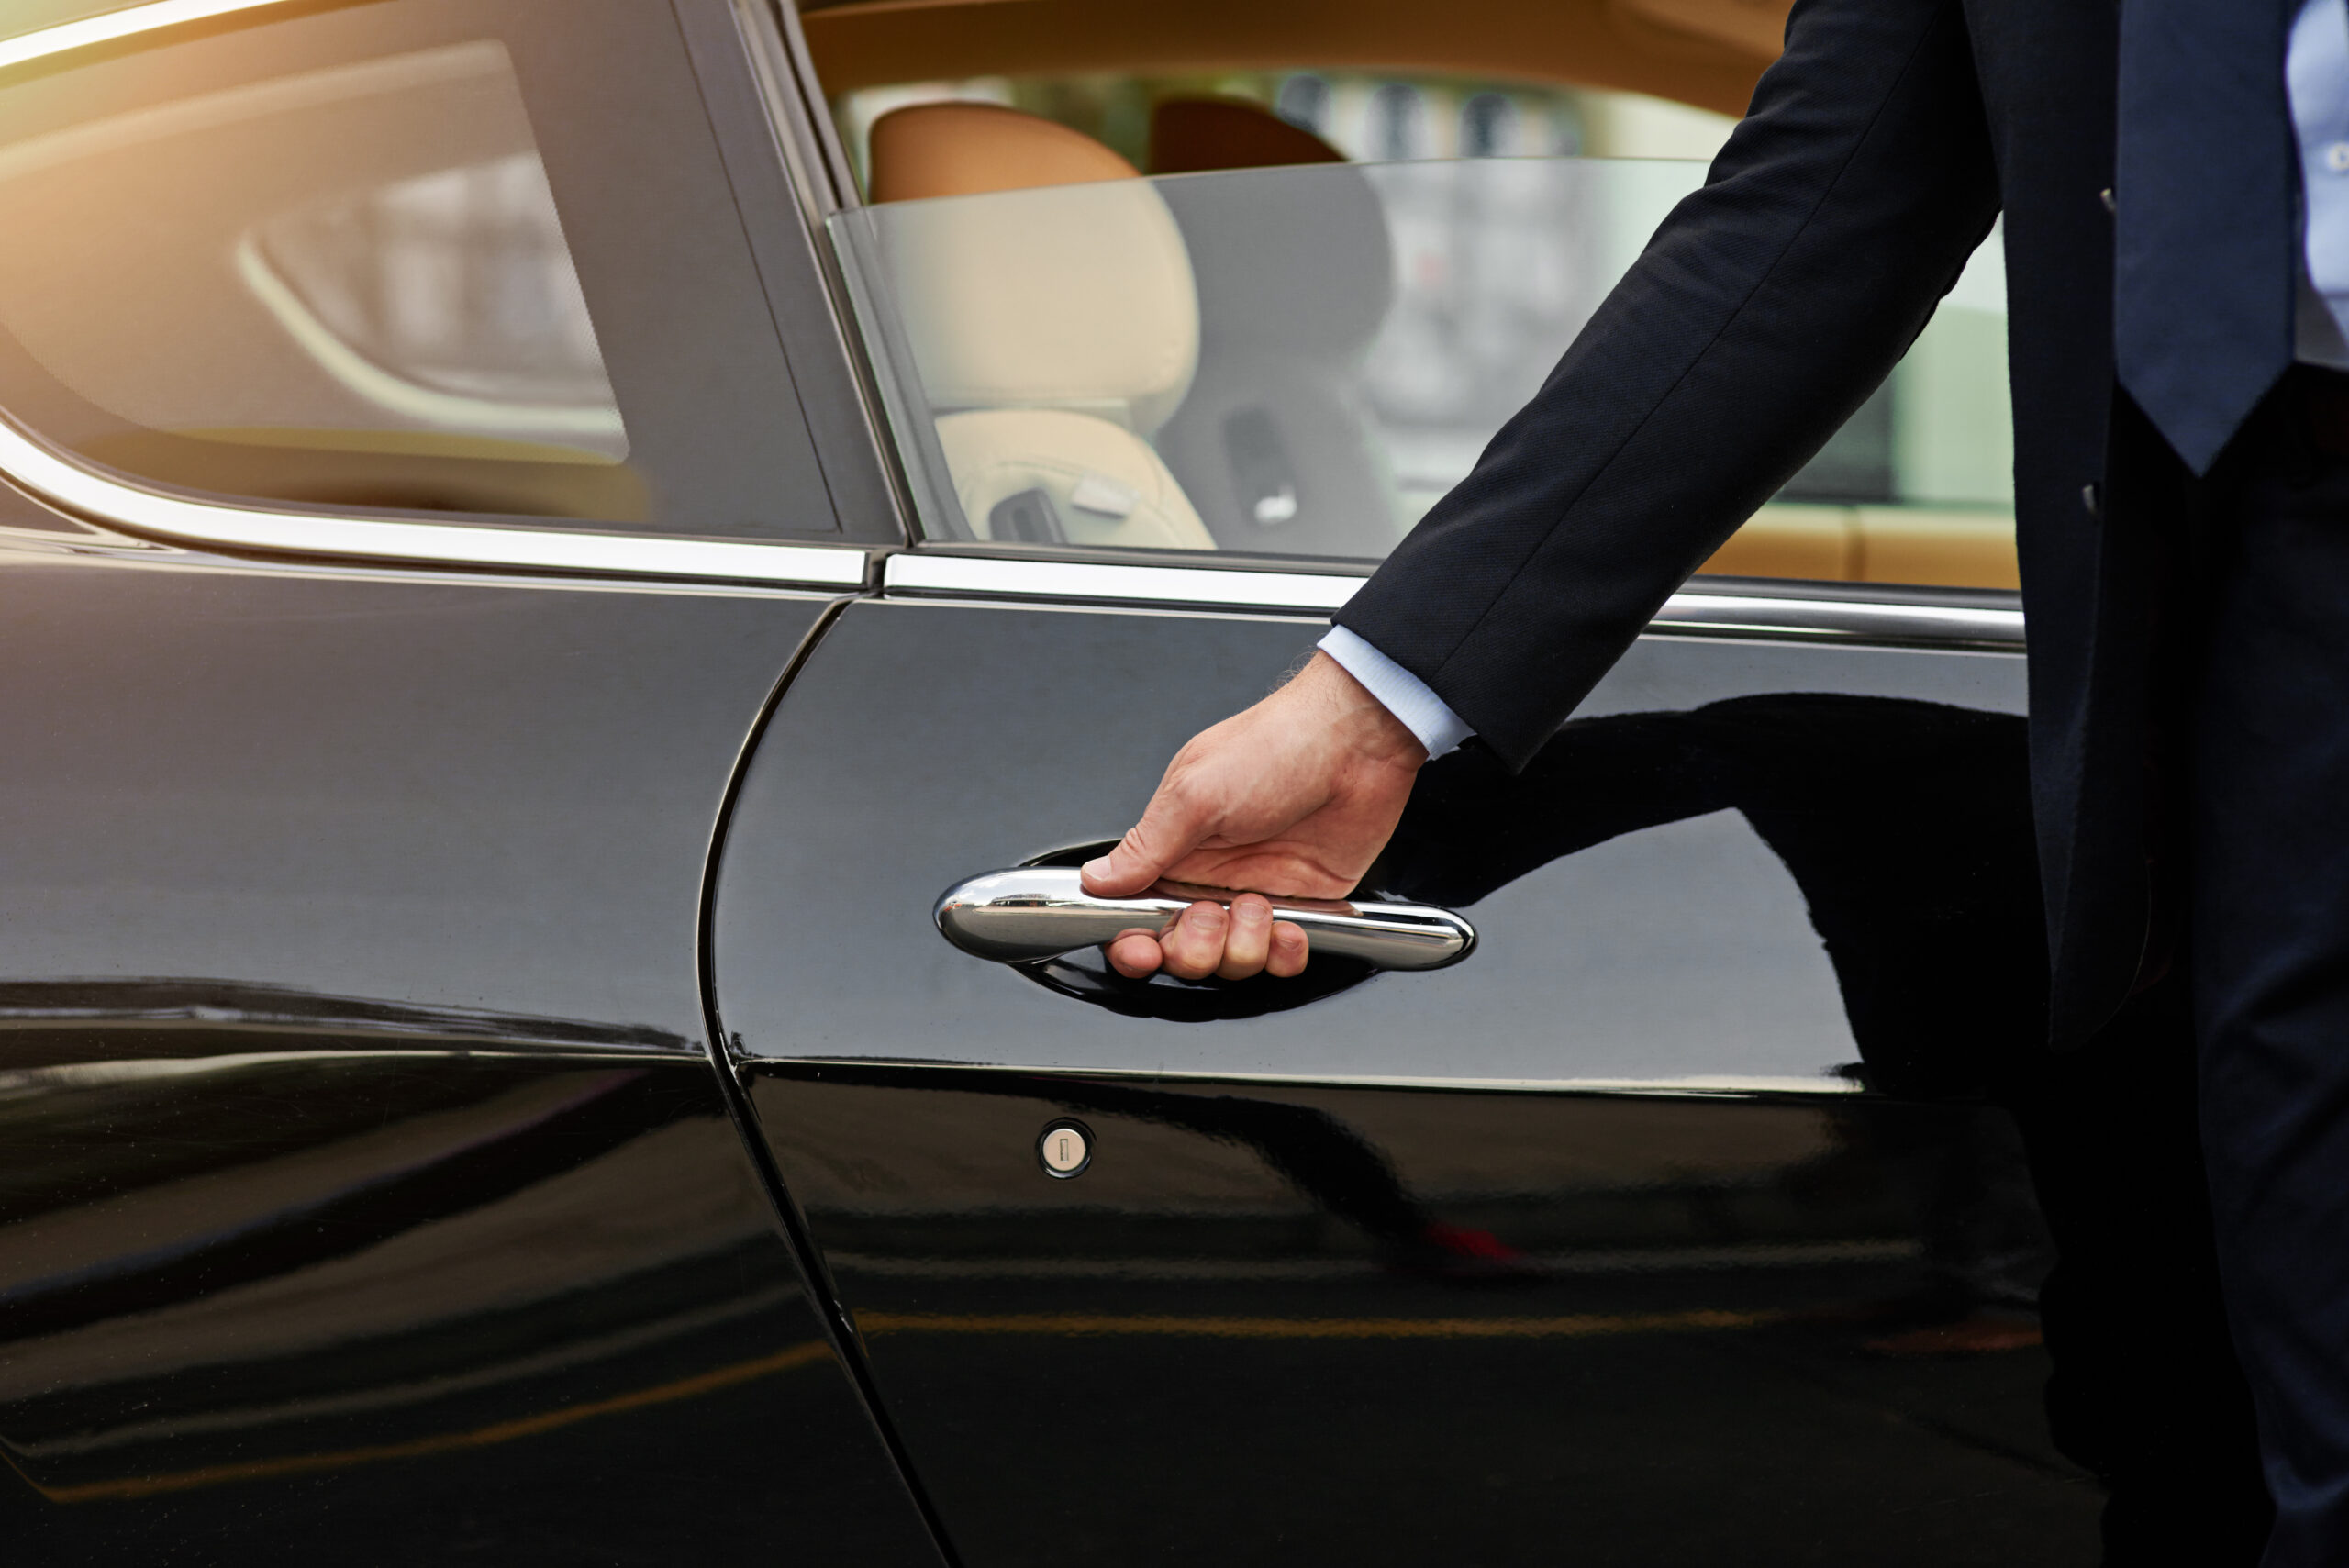 Businessman, hands and chauffeur by car door for travel accommodation, designated driver or commute. Hand of male person on vehicle handle in professional transport service, business class or pick up.